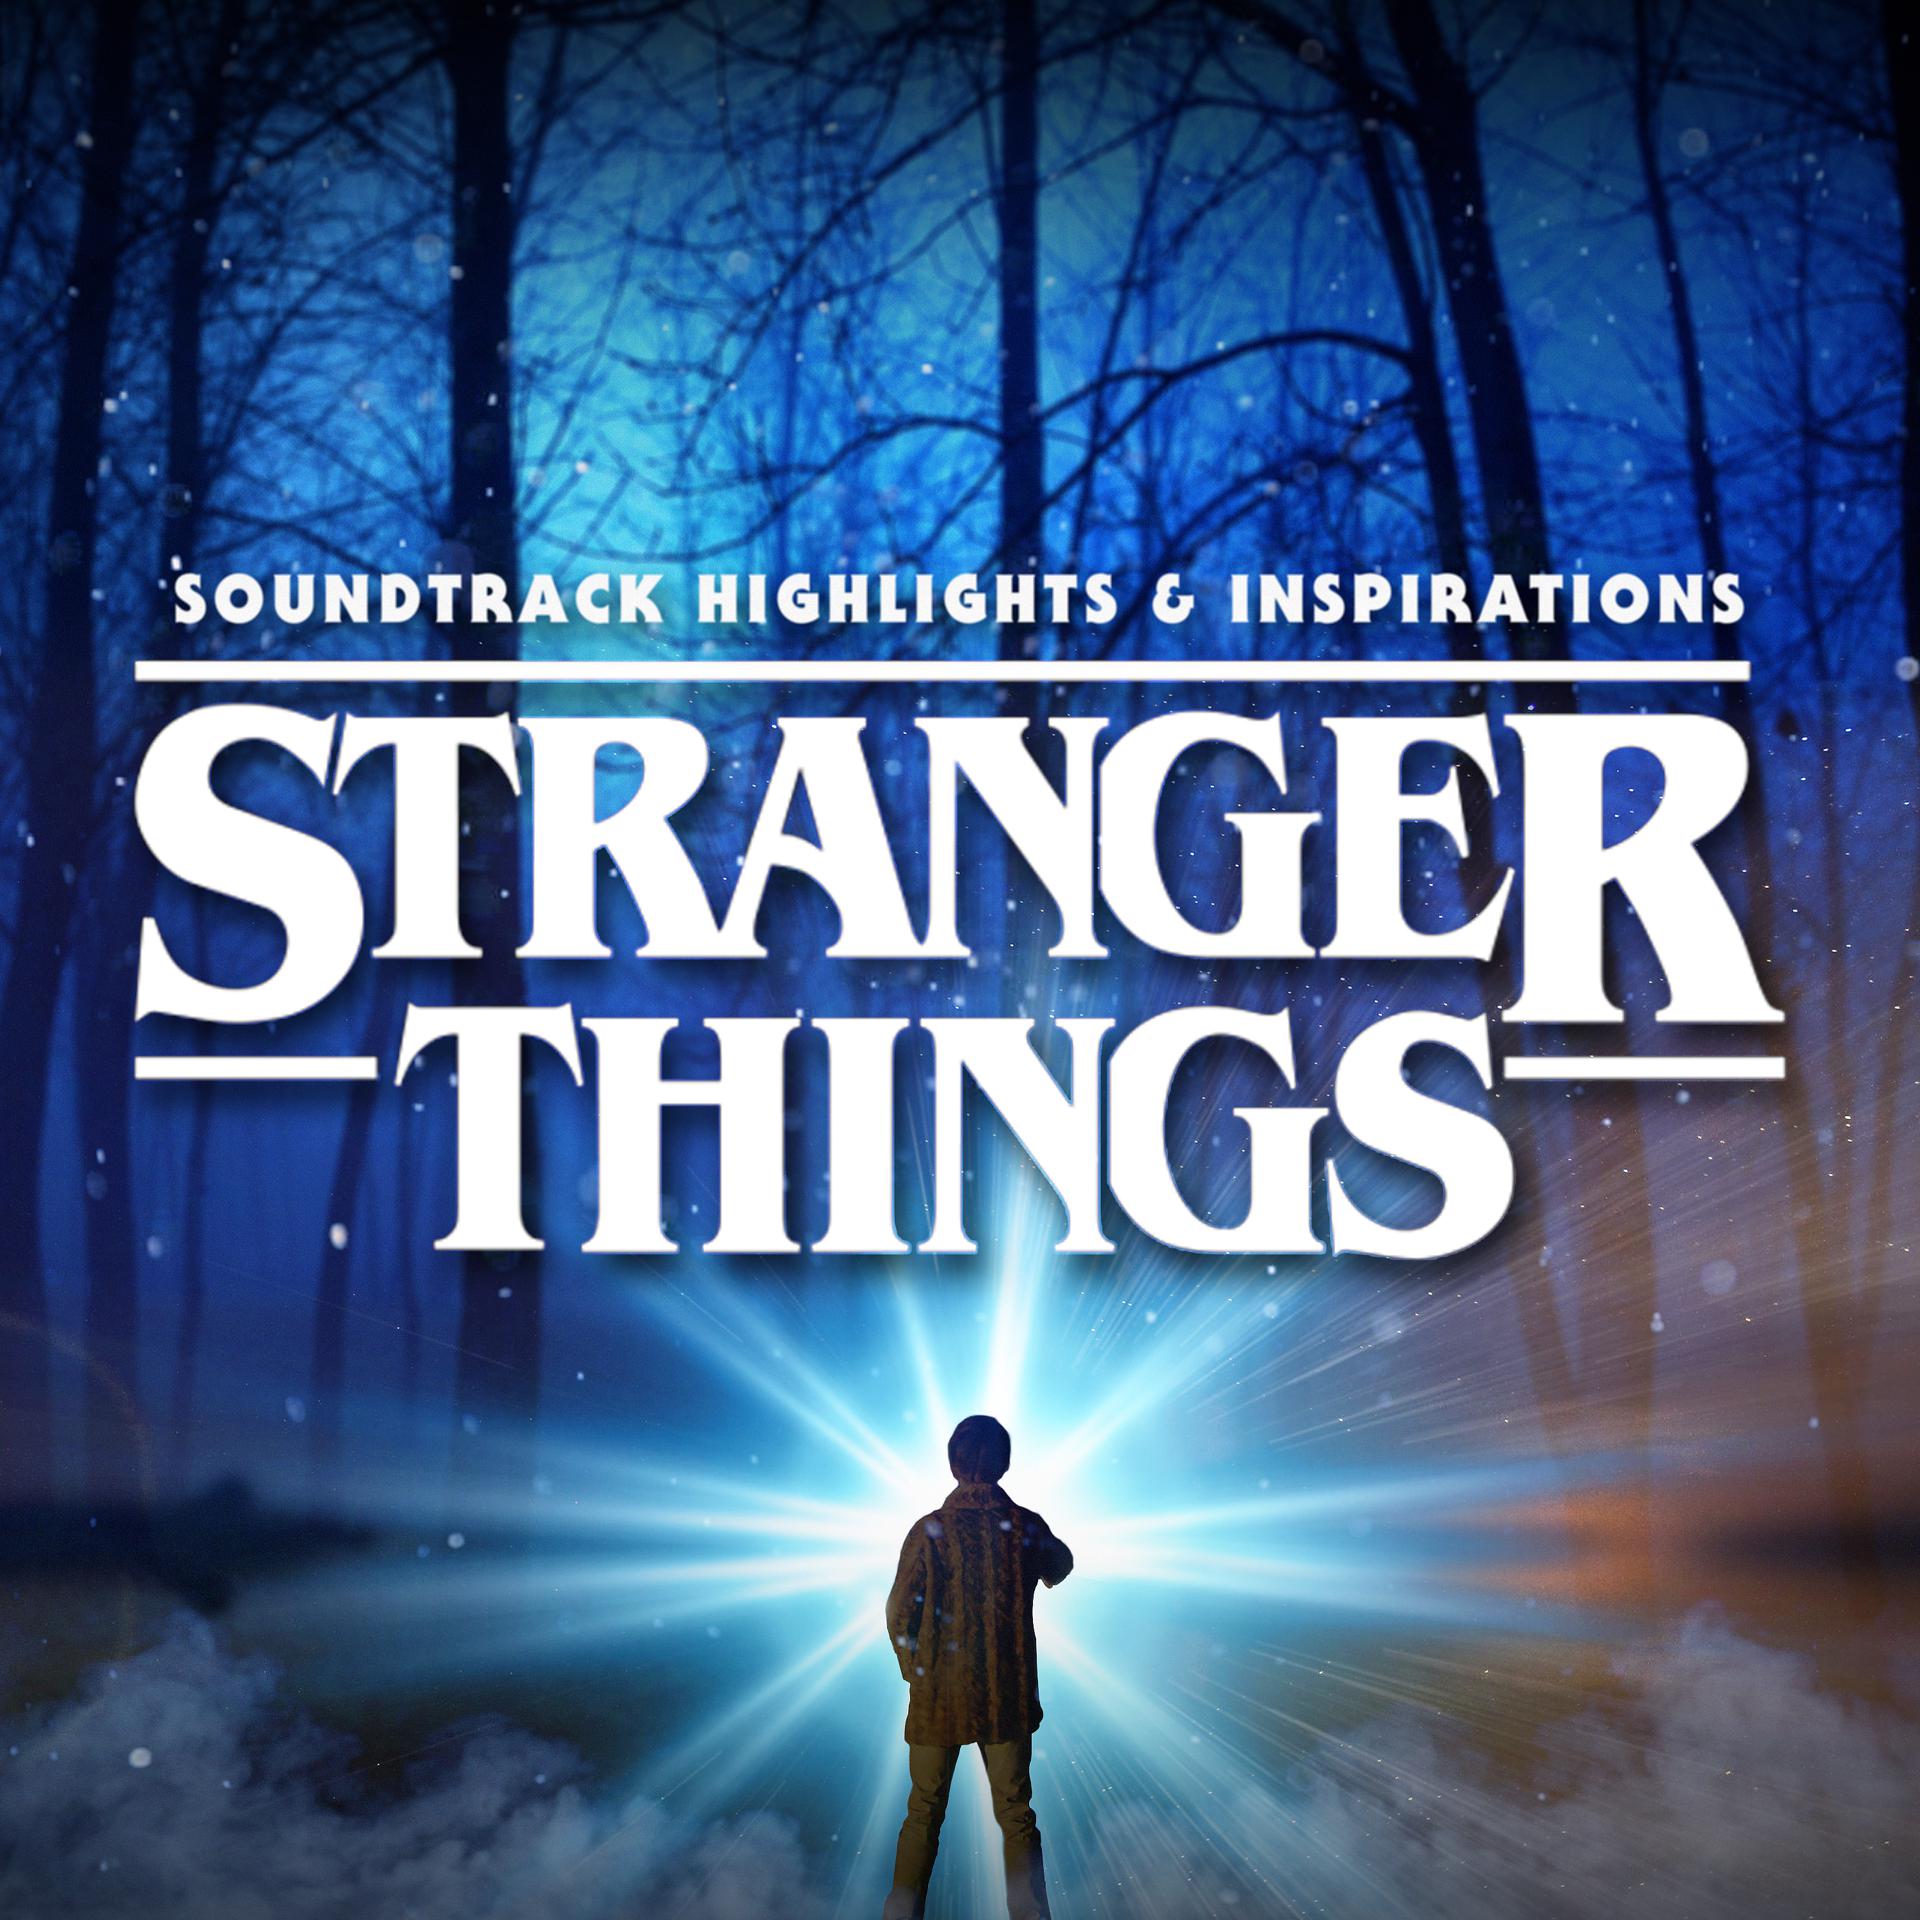 L orchestra cinematique. OST "stranger things". Stranger things Theme. Stranger things OST обложка. Stranger things main Theme l'Orchestra Cinematique.